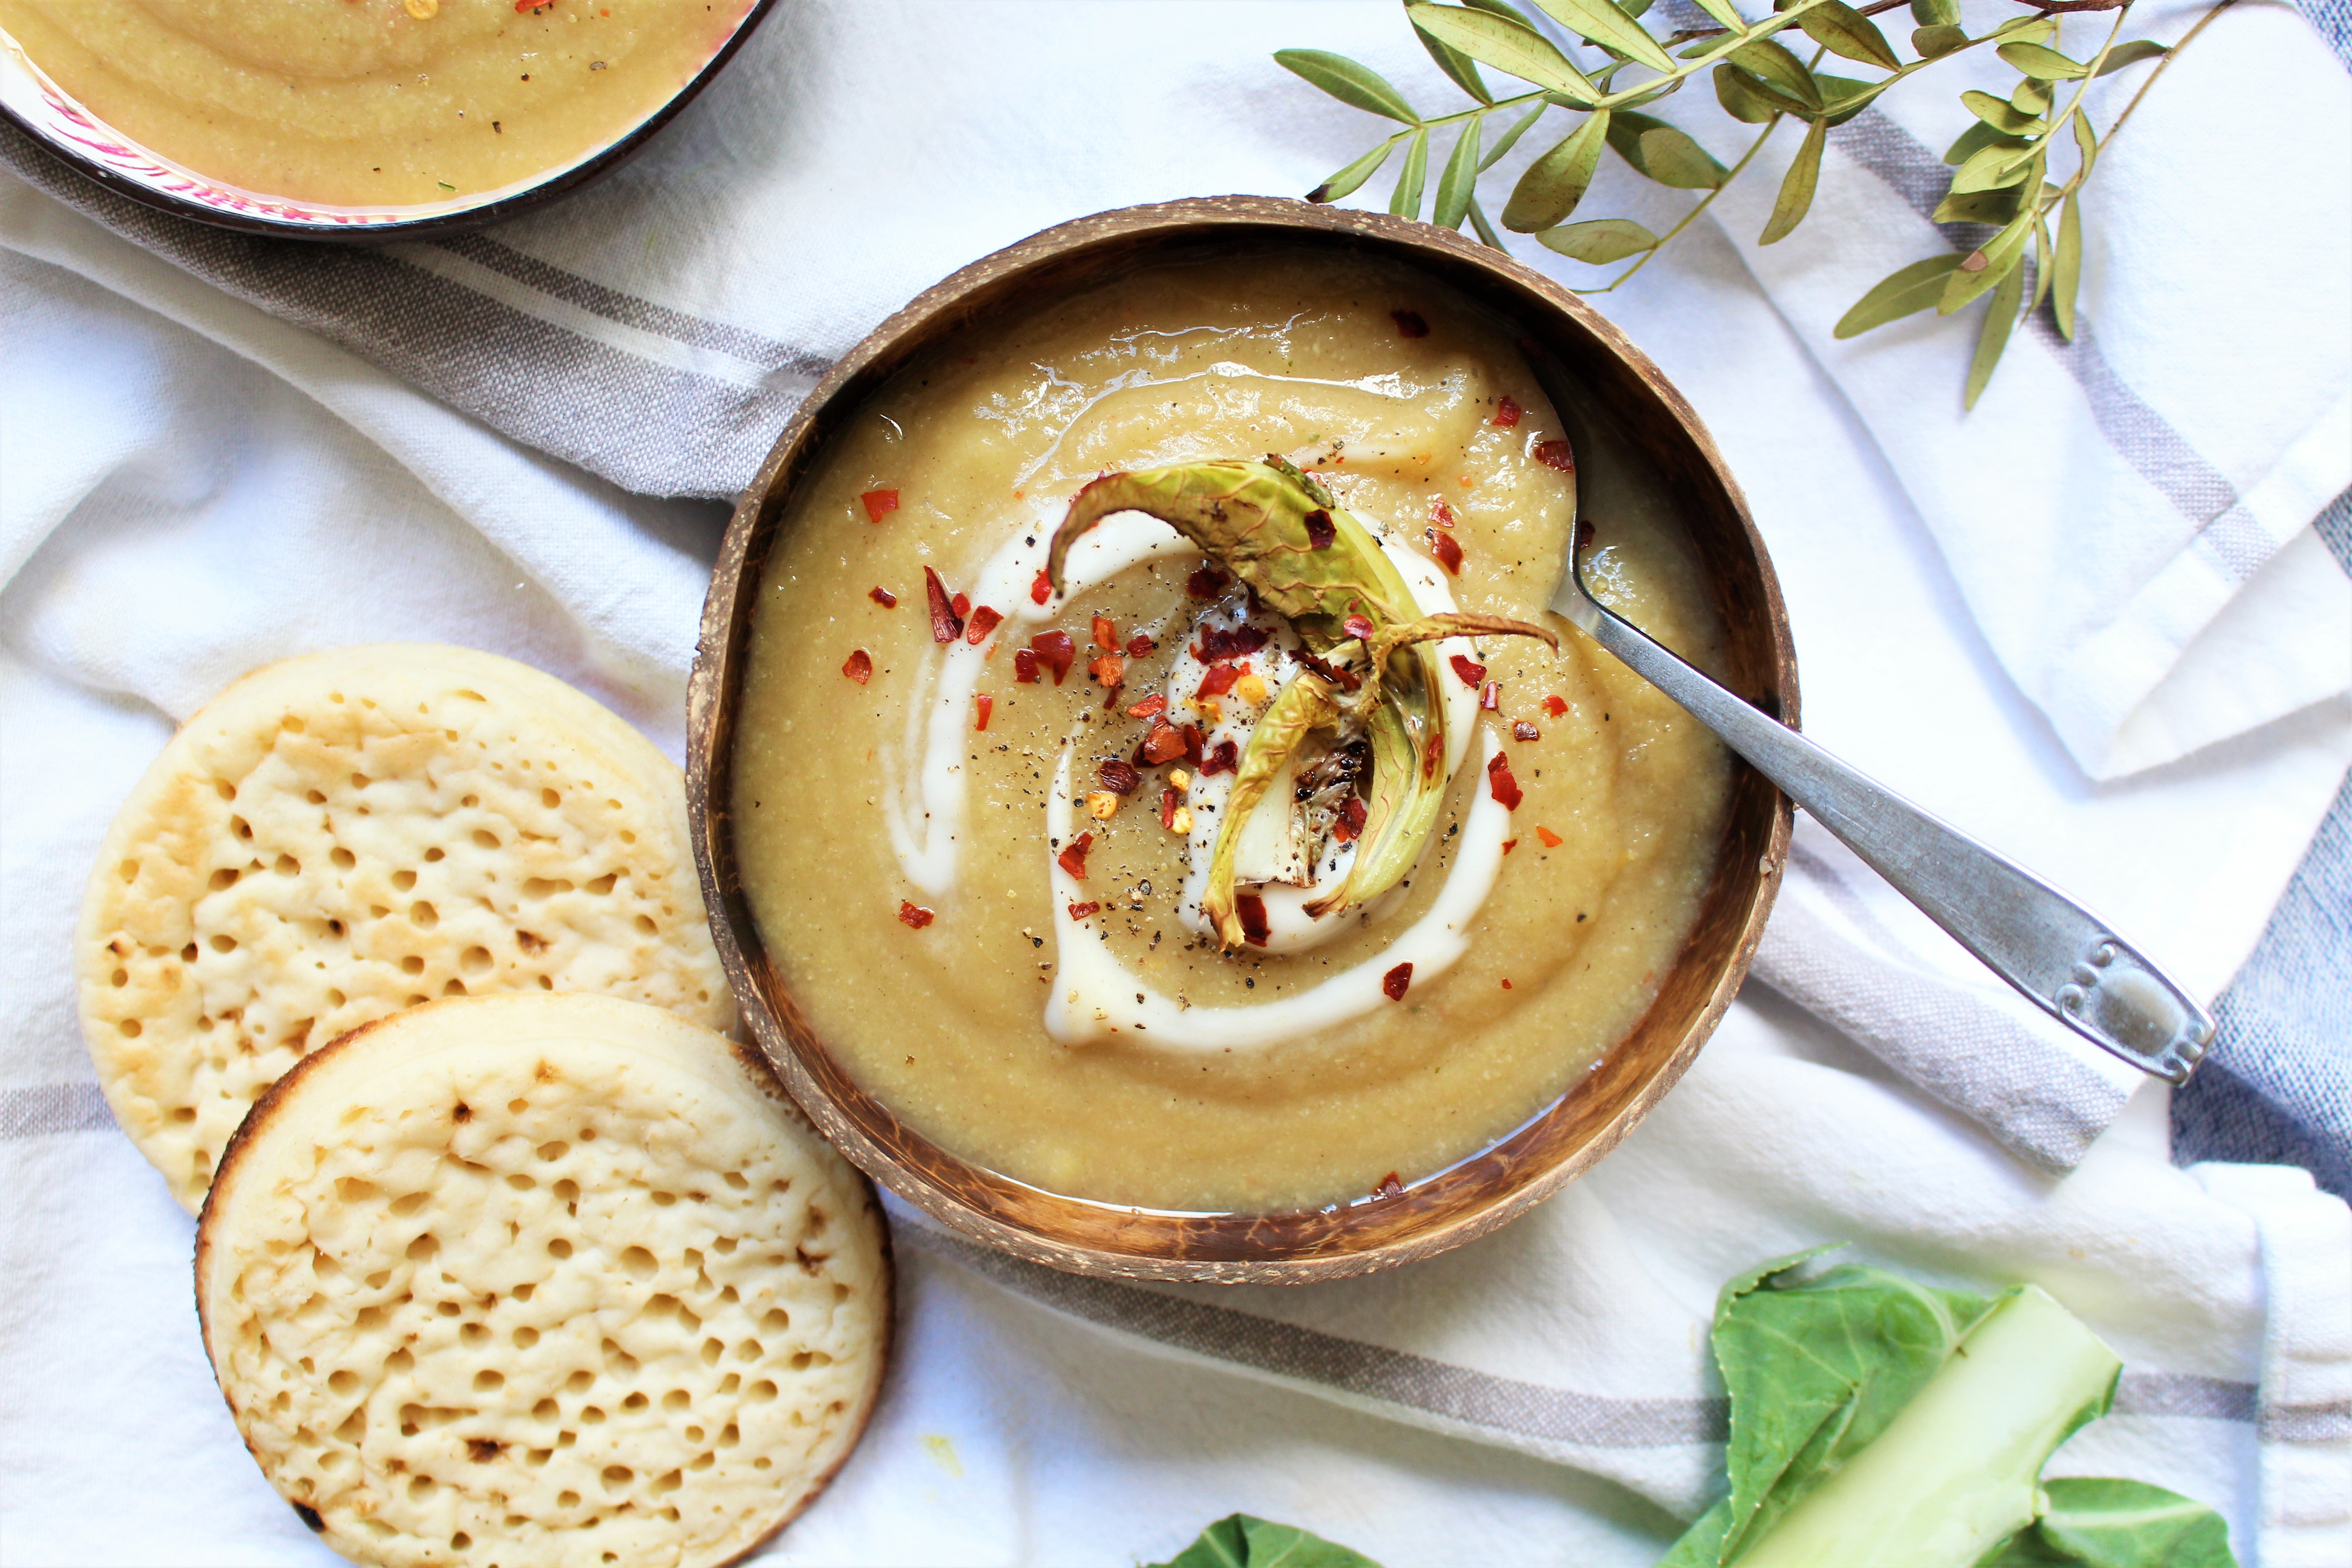 Spiced Parsnip and Cauliflower Soup